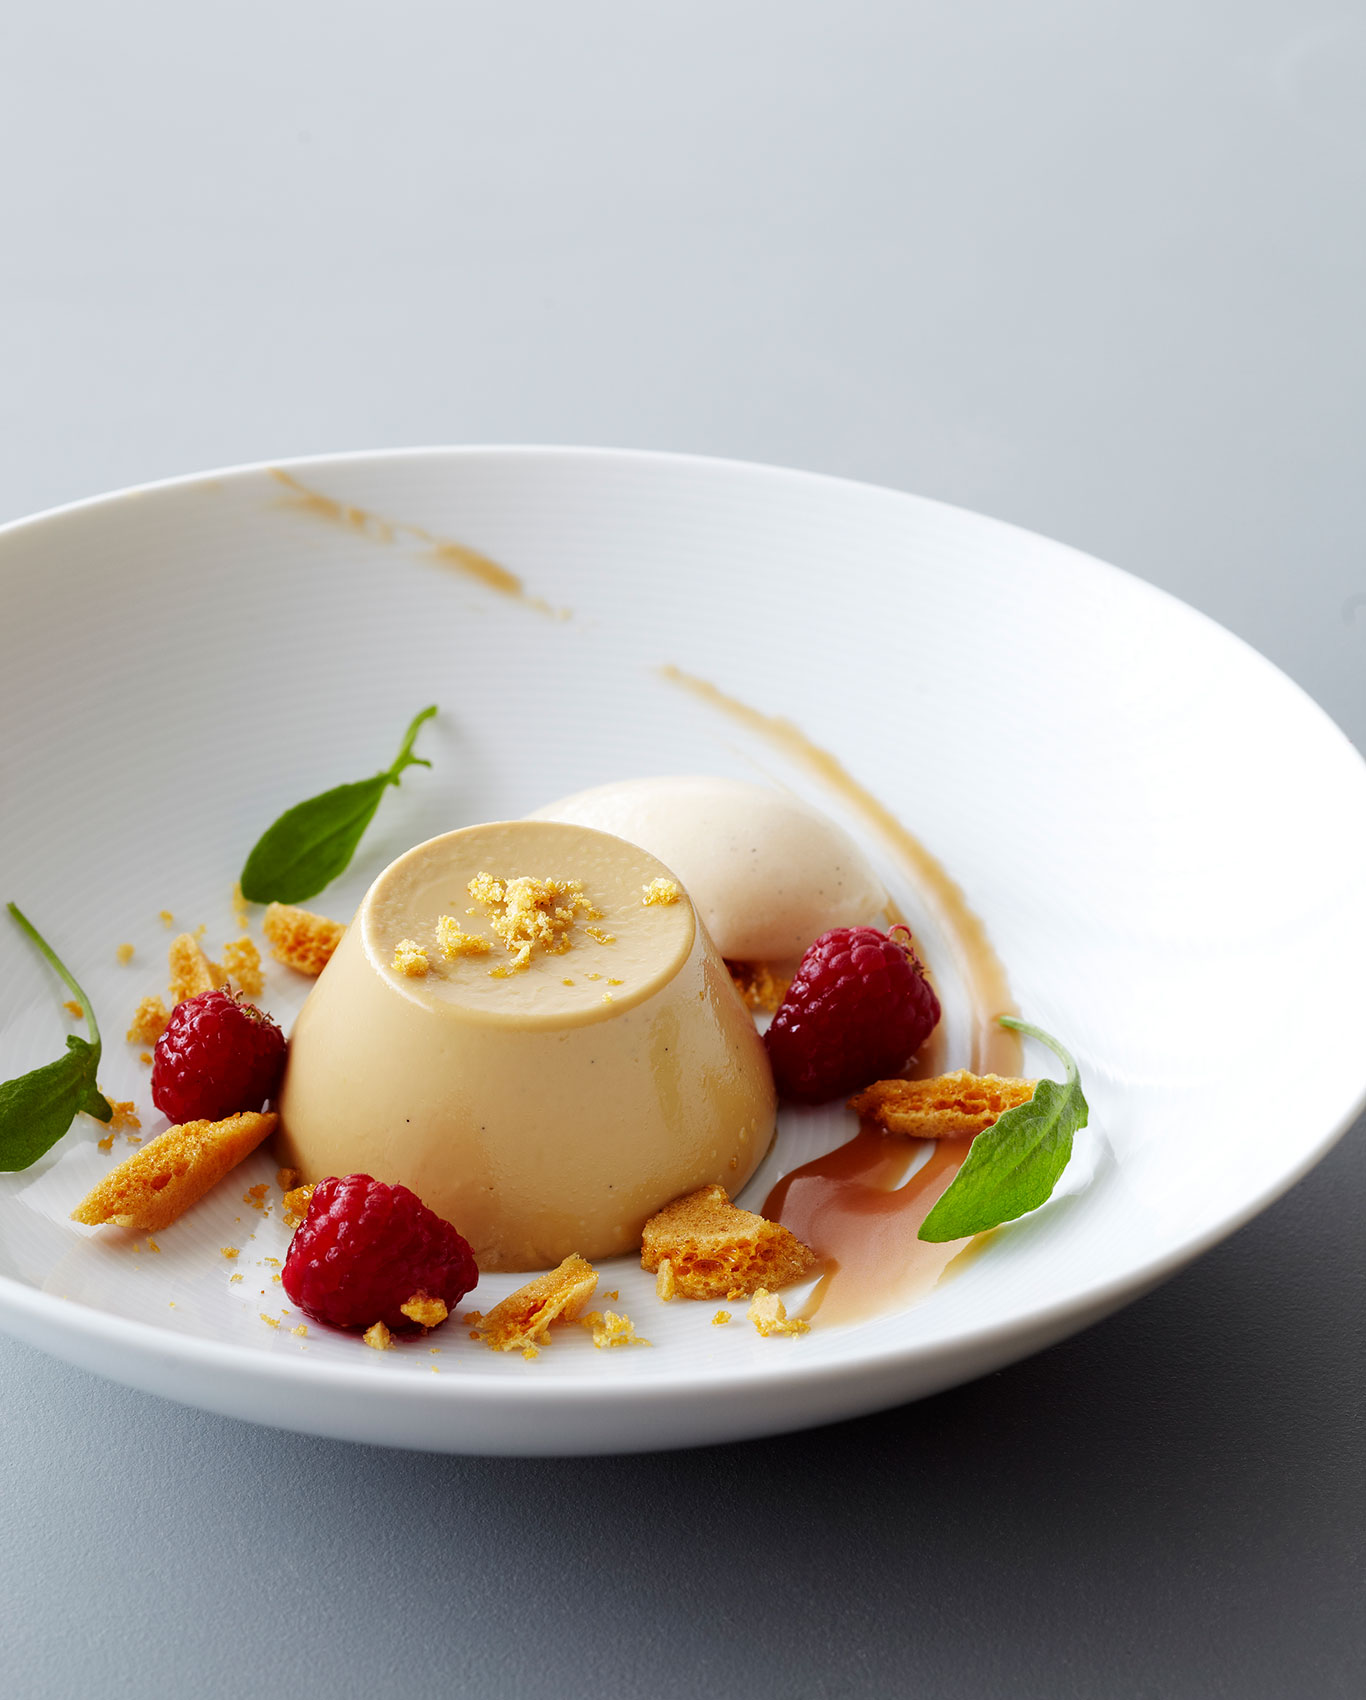 Southon Cooking • The Foodstore Butterscotch Panna Cotta with Fresh Raspberries • Hospitality & Editorial Food Photography